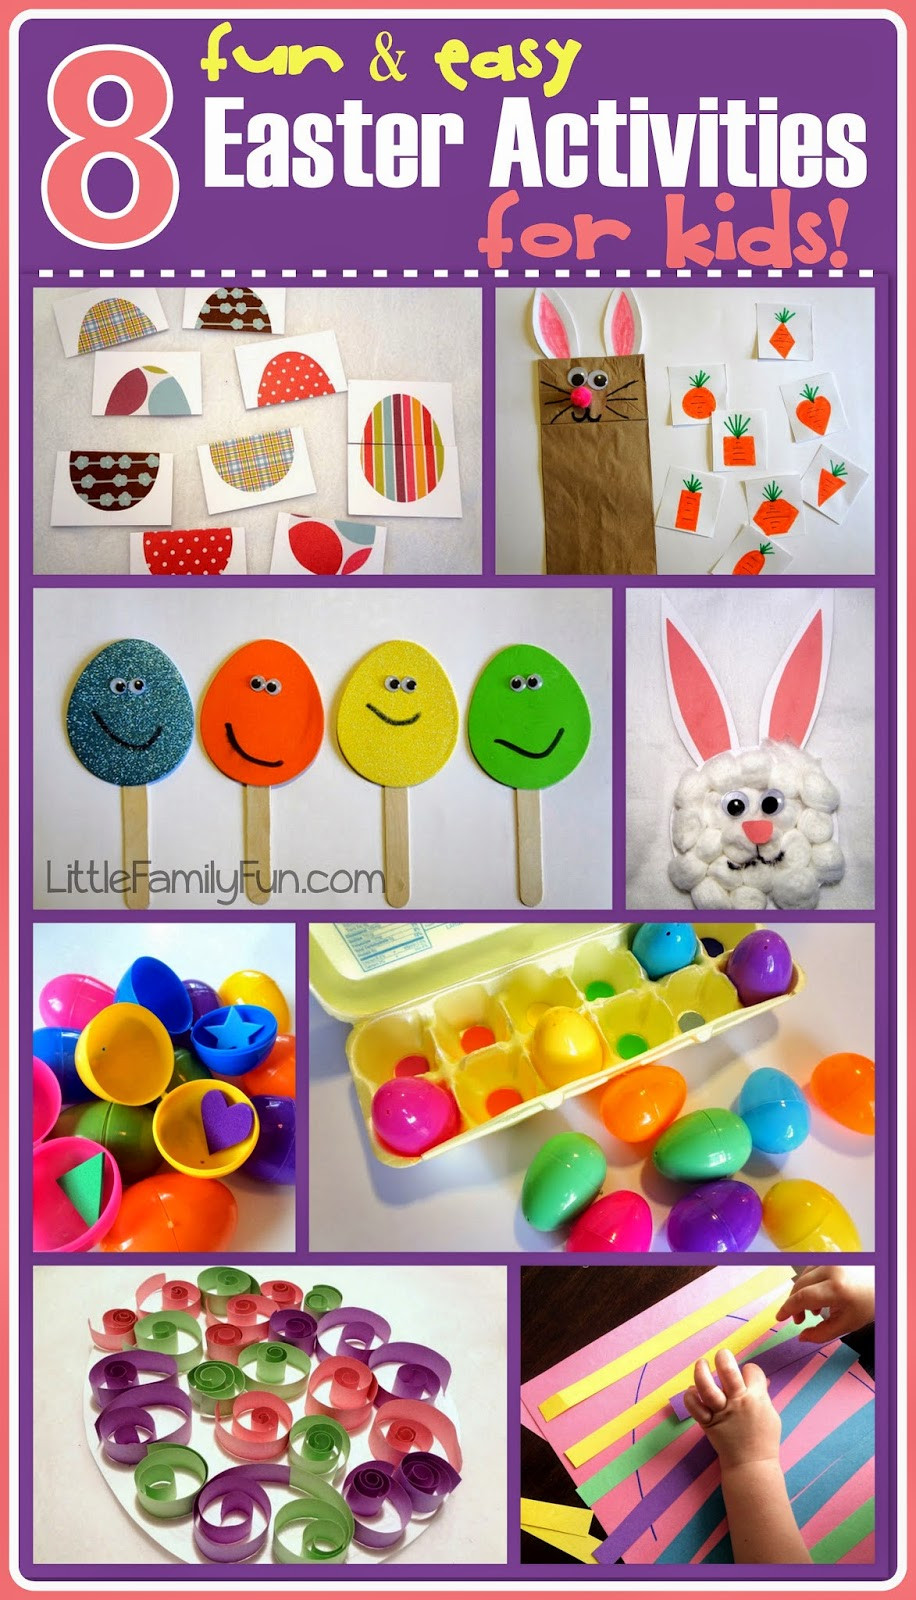 Toddlers Easter Activities
 Little Family Fun 8 fun & easy Easter Activities for Kids